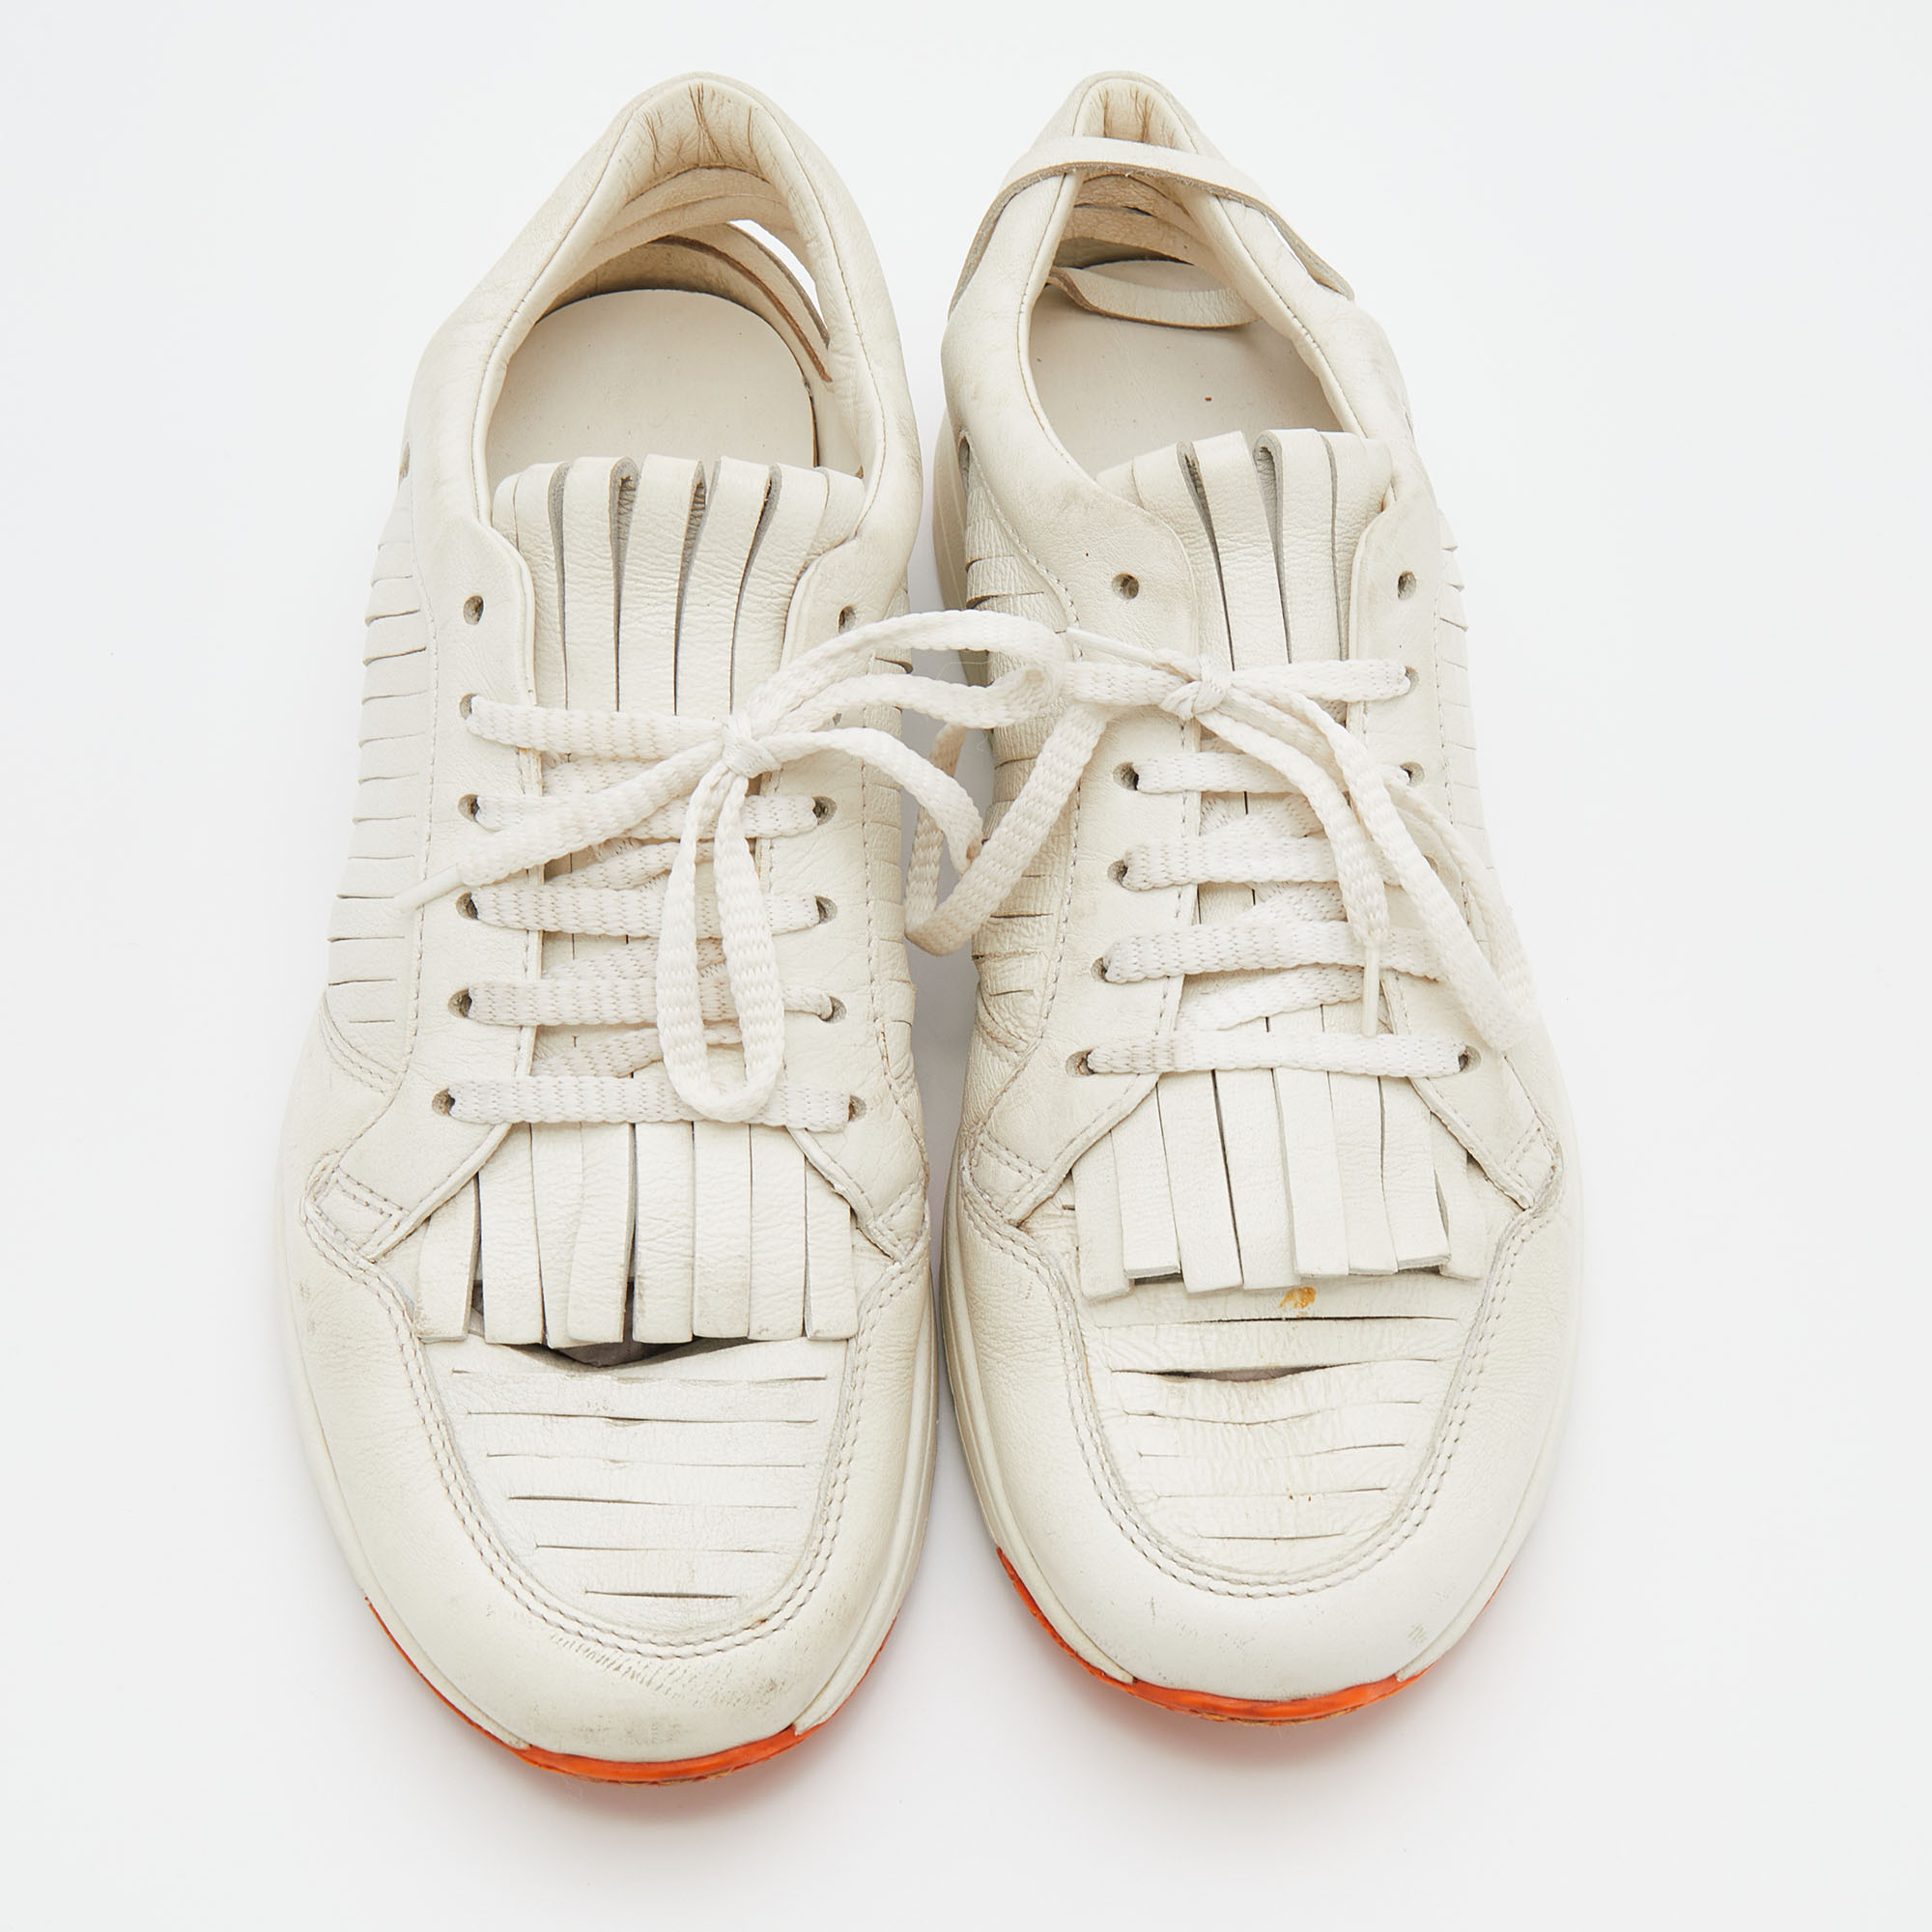 Gucci White Leather Tassel Low Top Sneakers Size 36.5